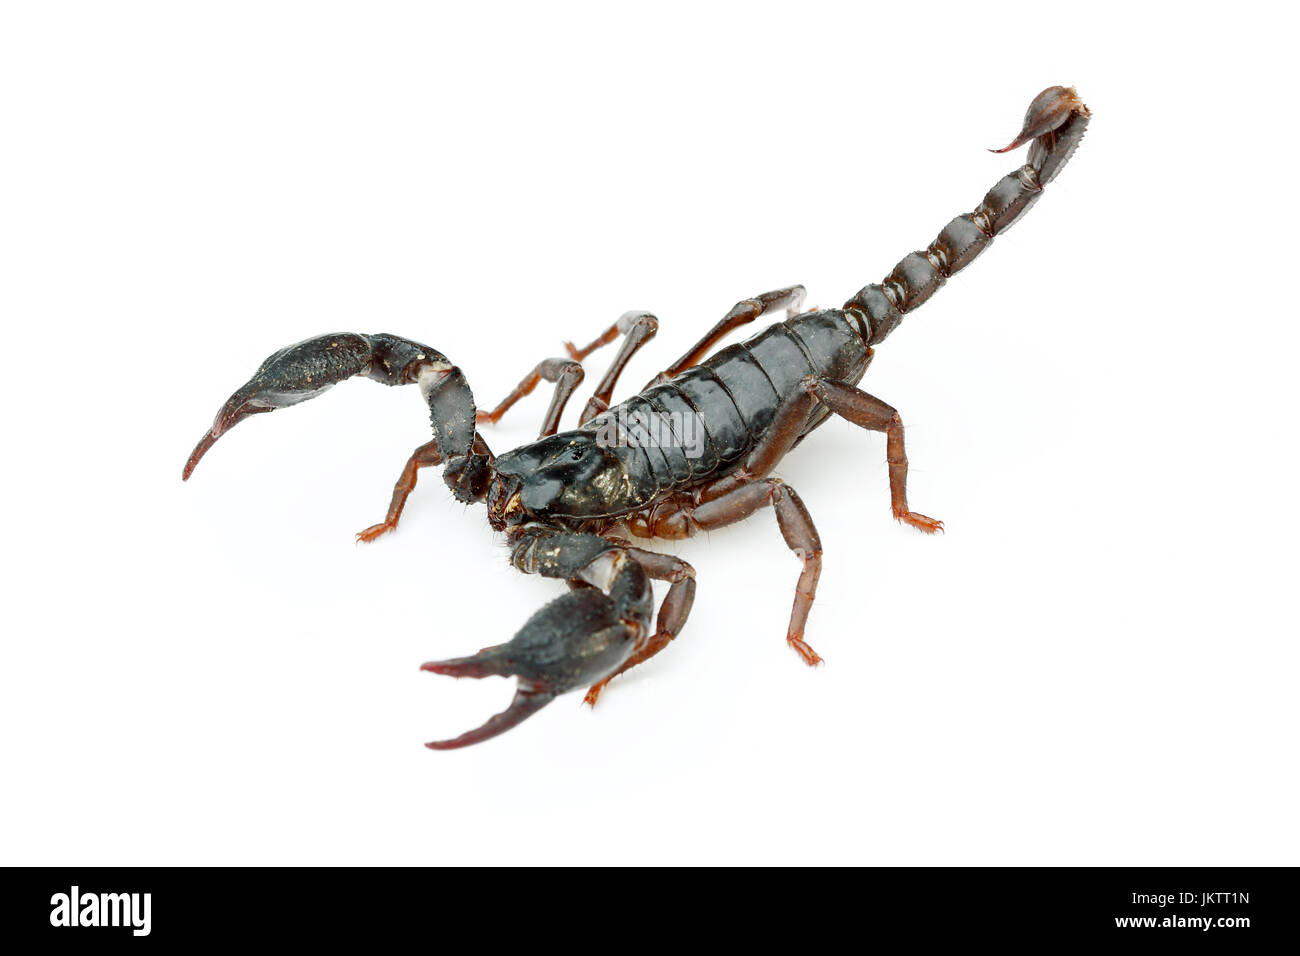 Asian giant forest scorpion (Heterometrus laoticus) on white background. H. laoticus is a member of giant forest scorpions (Heterometrus sp.) found in Stock Photo